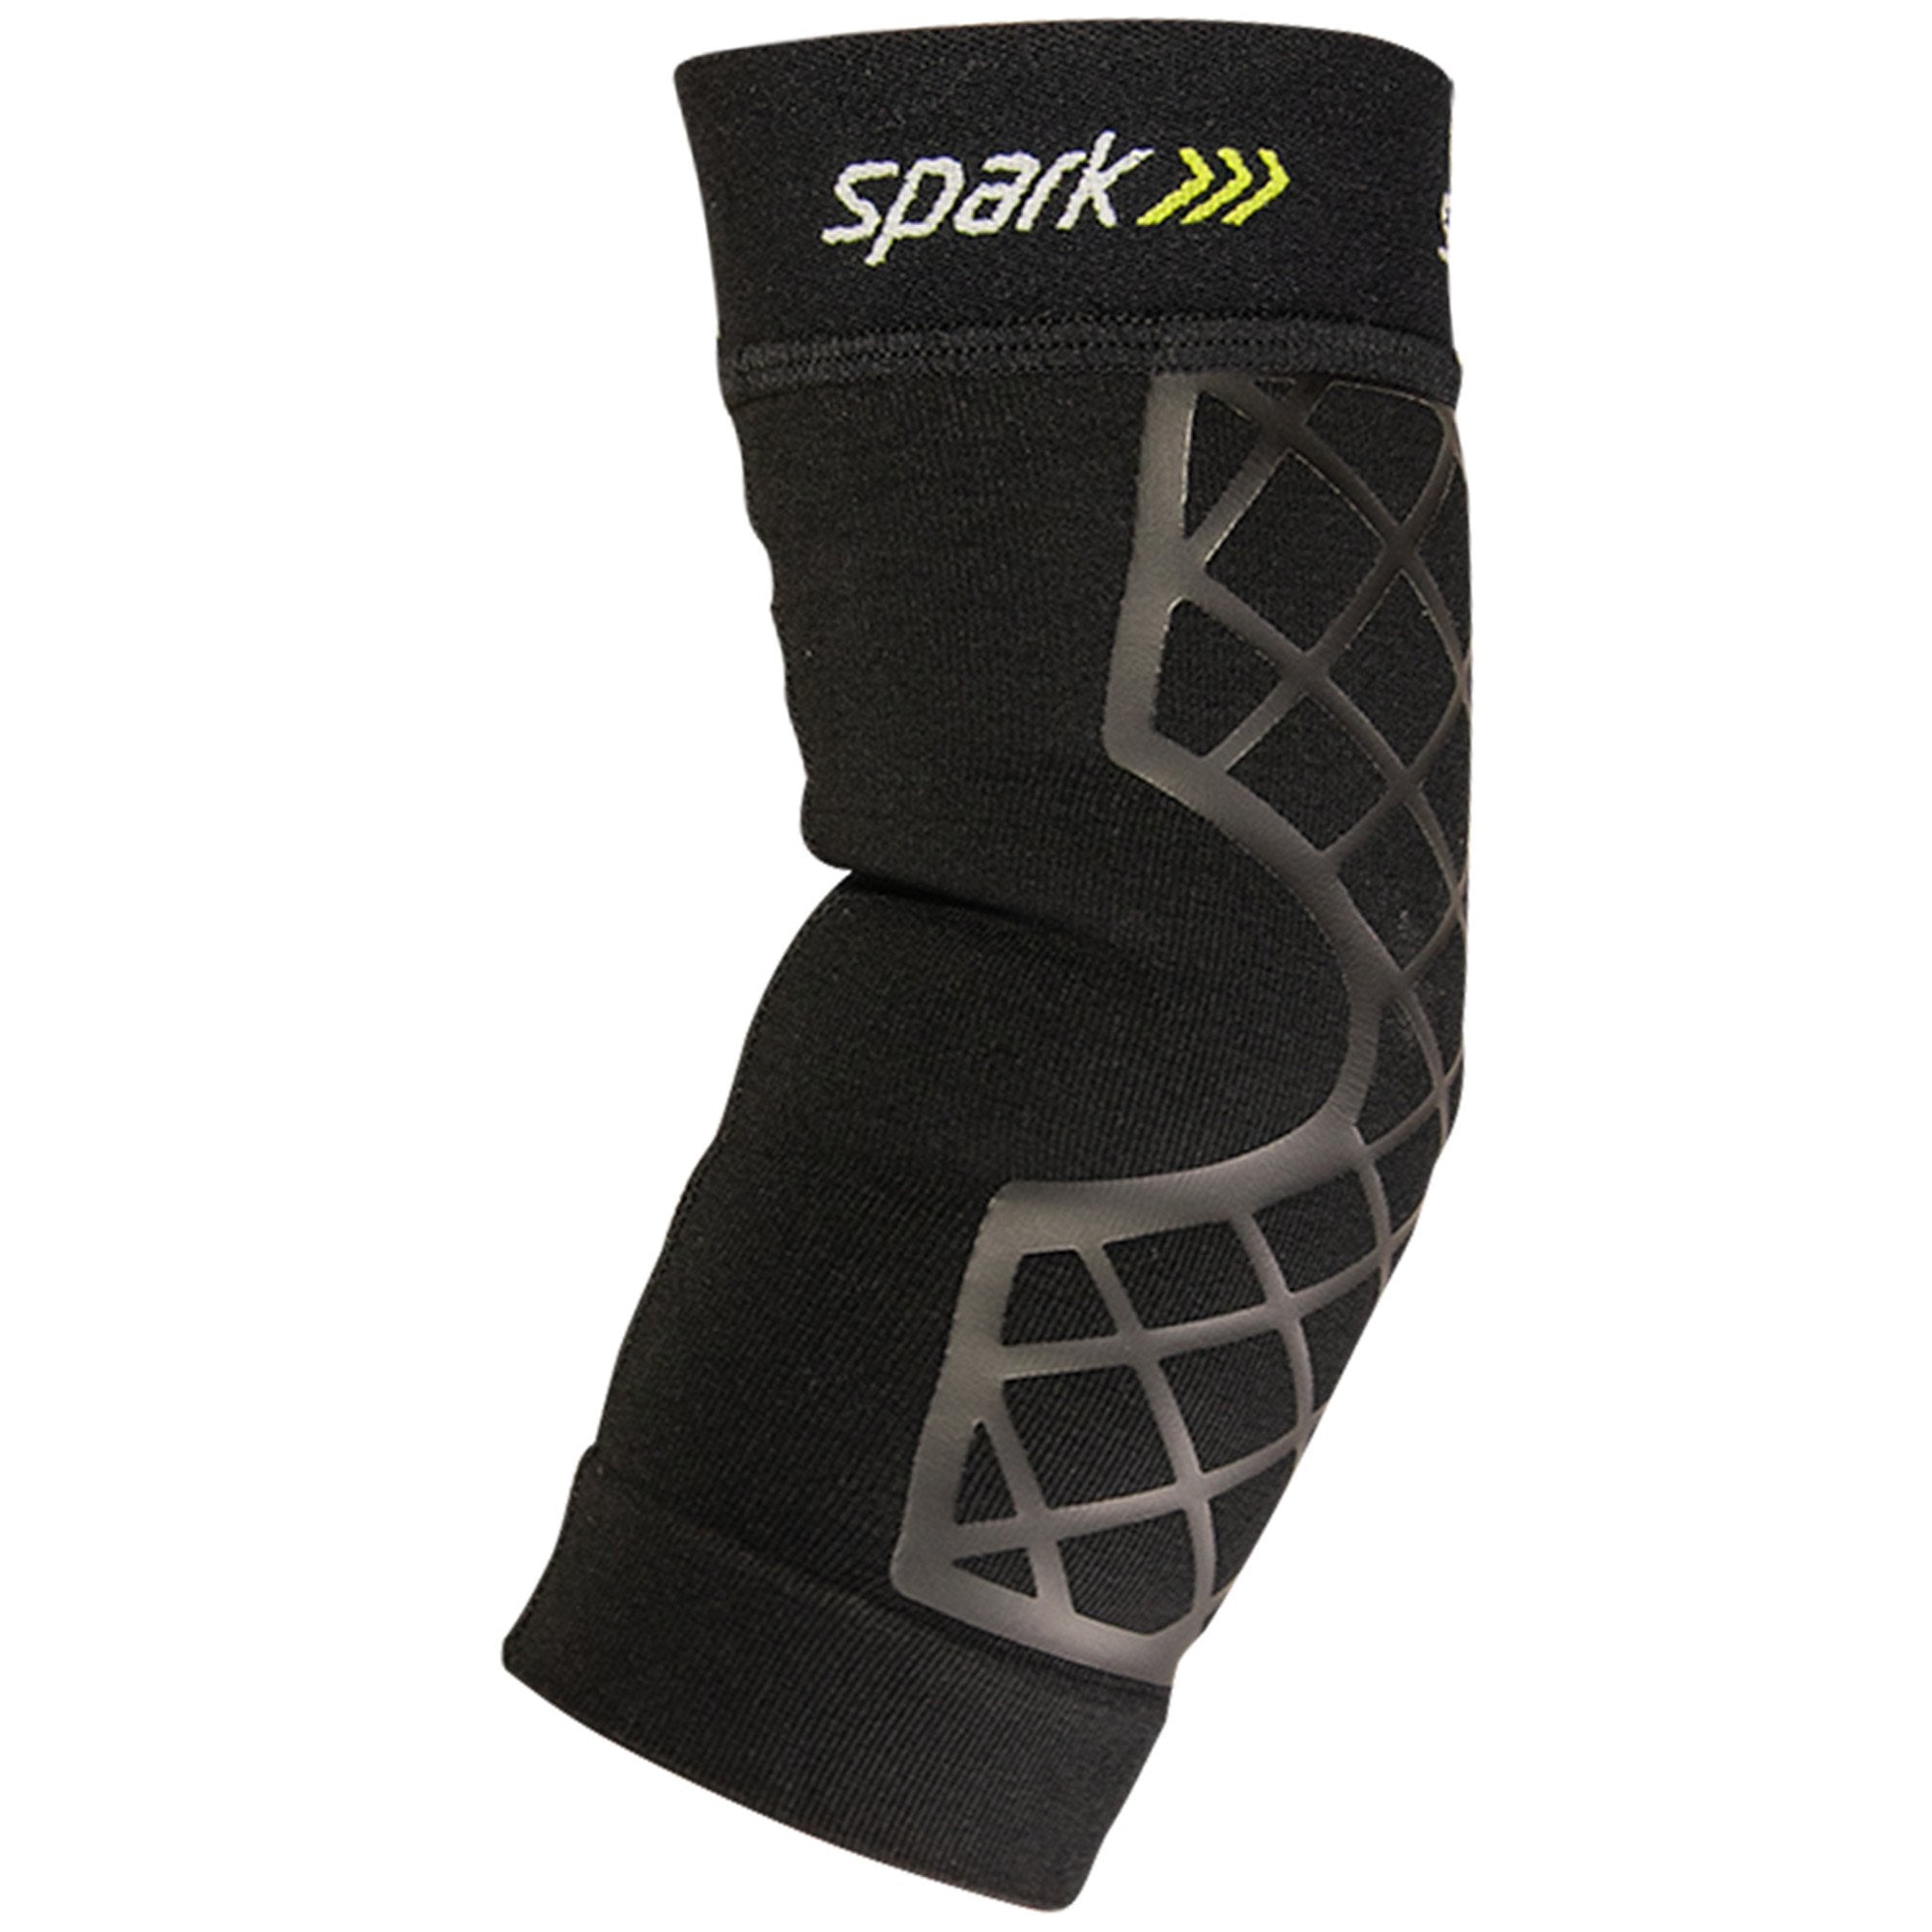 Elbow Support Spark Kinetic Large Pull-On Sleeve Left or Right Elbow 12-1/2 to 15 Inch Elbow Circumference Black